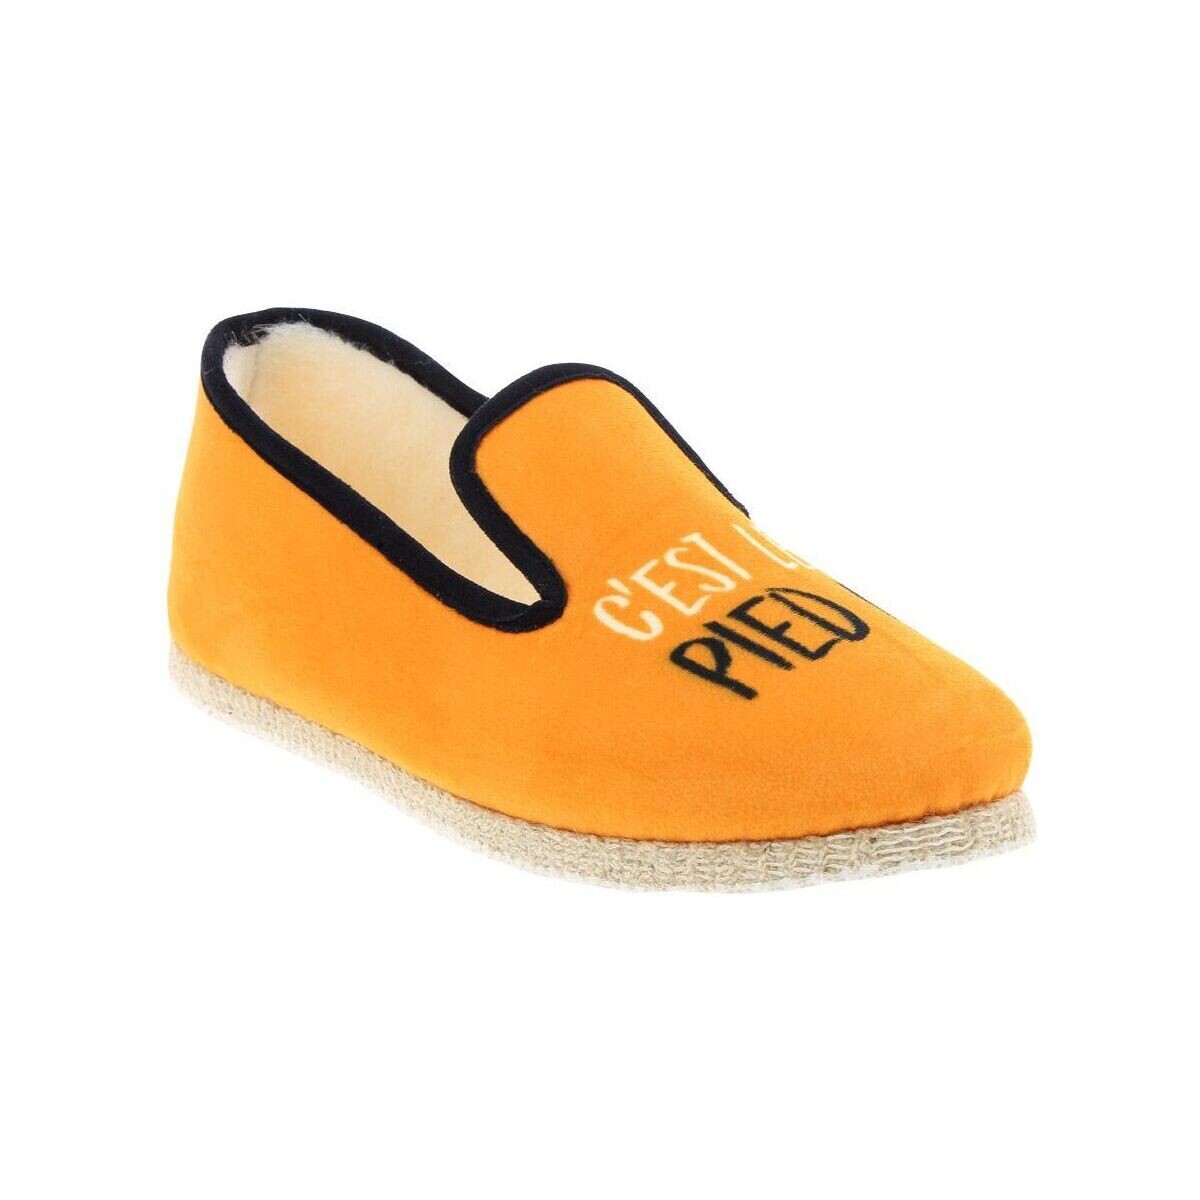 Chaussures Chaussons Chausse Mouton Charentaises MESSAGE_5A Orange